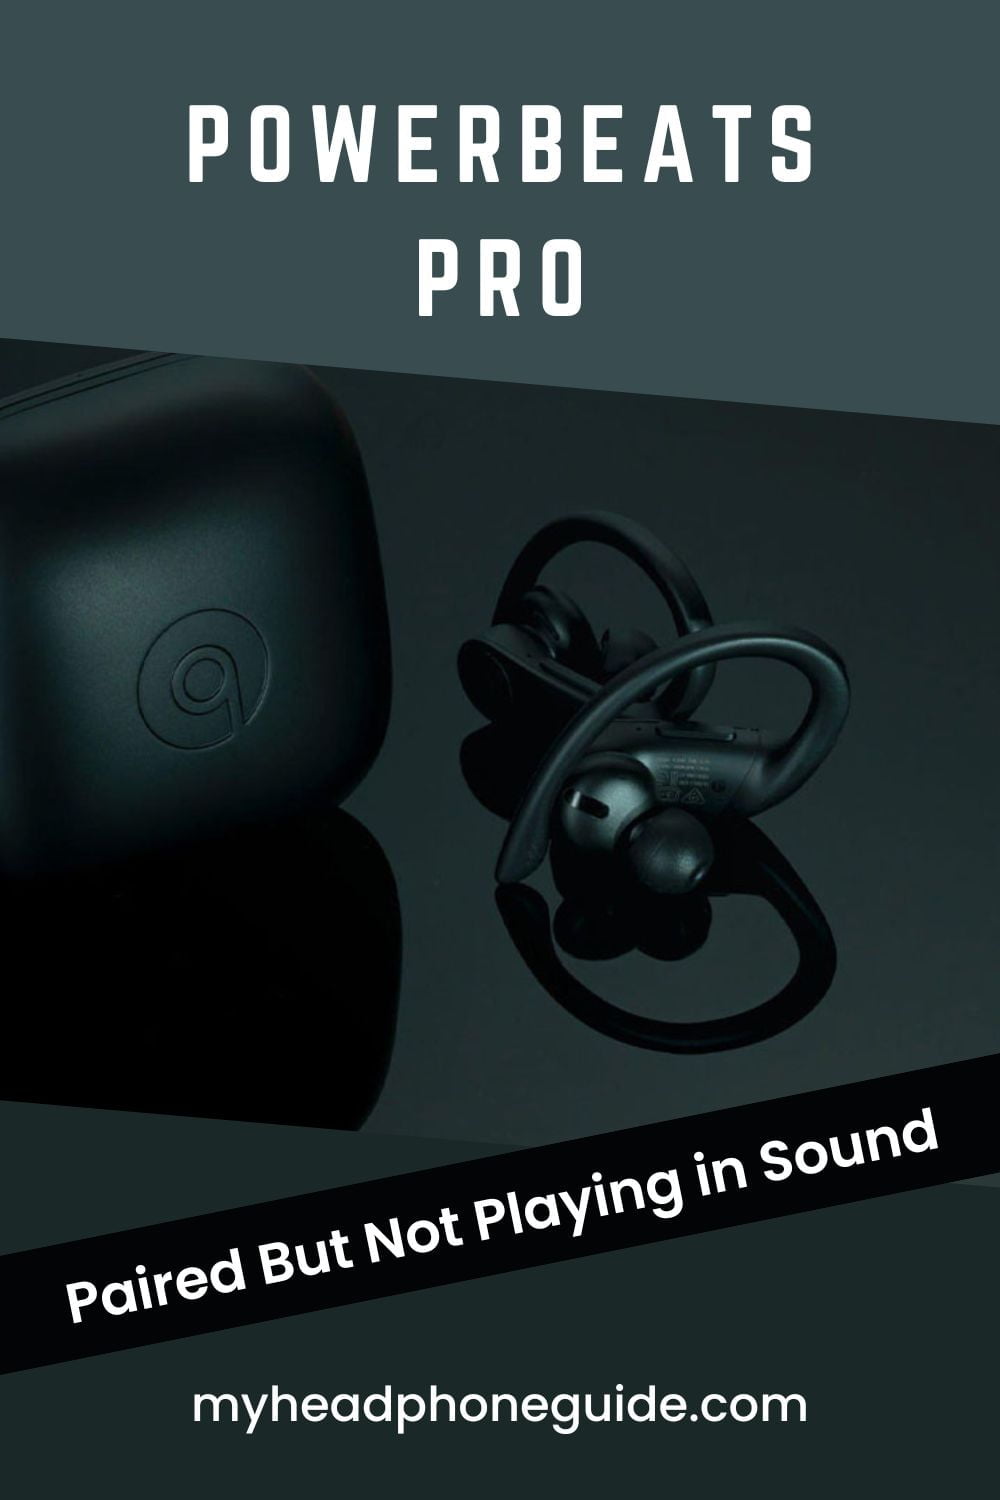 Powerbeats Pro Paired But Not Playing in Sound